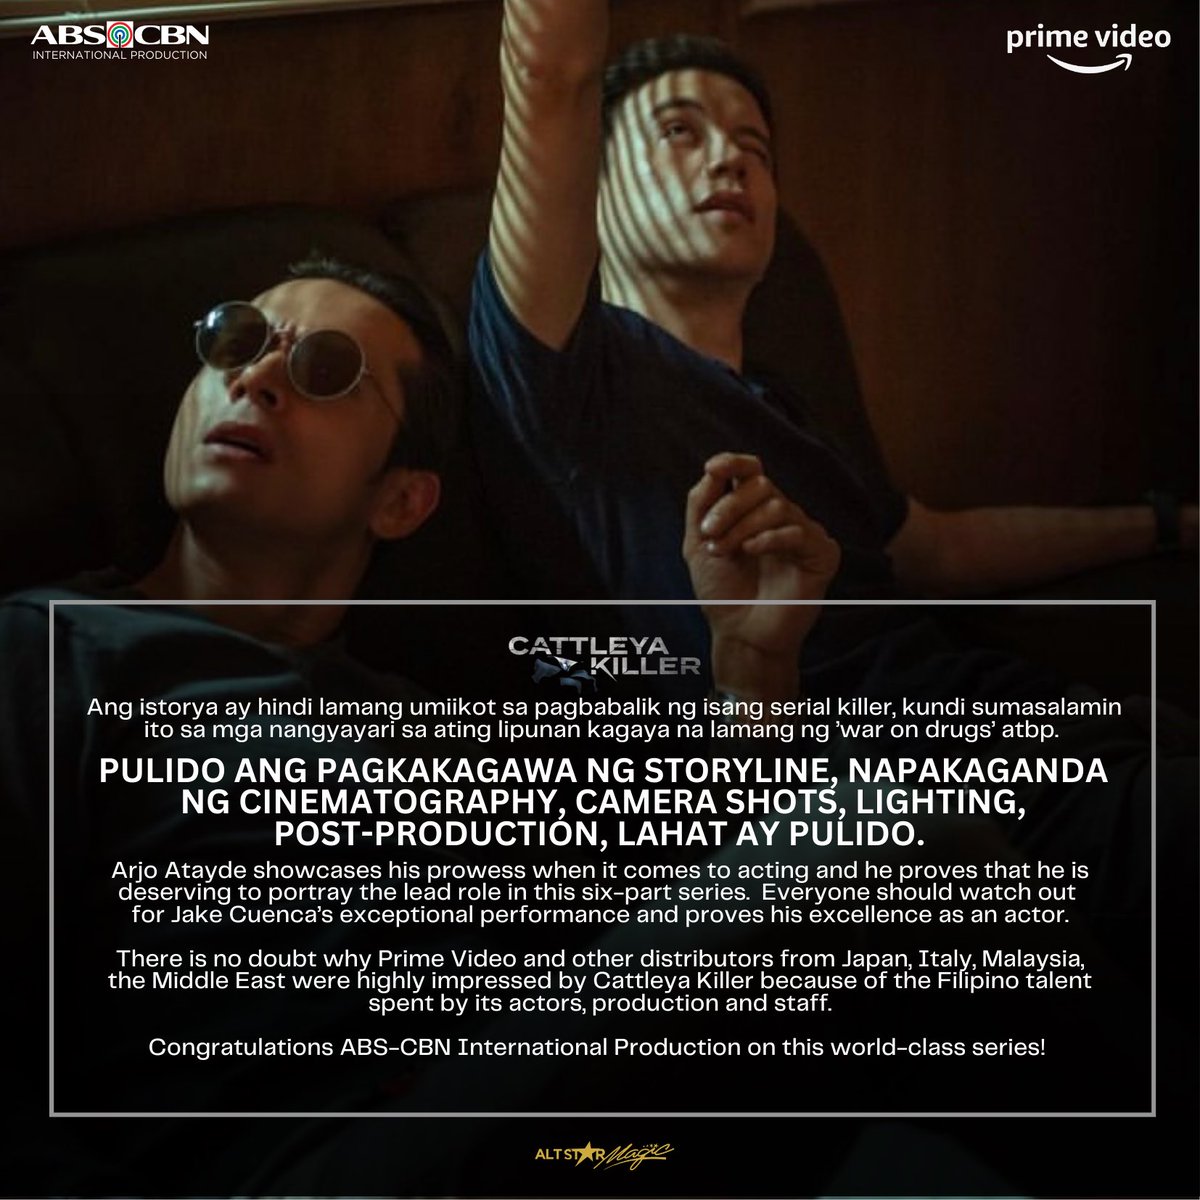 REVIEW: Mula sa story to cinematography to lighting to camera shots… LAHAT AY PULIDO 🔥

No doubt why Prime Video and distributors from other countries were impressed to #CattleyaKiller during its showing at MIPCOM Cannes.

Arjo’s eyes are powerful especially sa second episode…